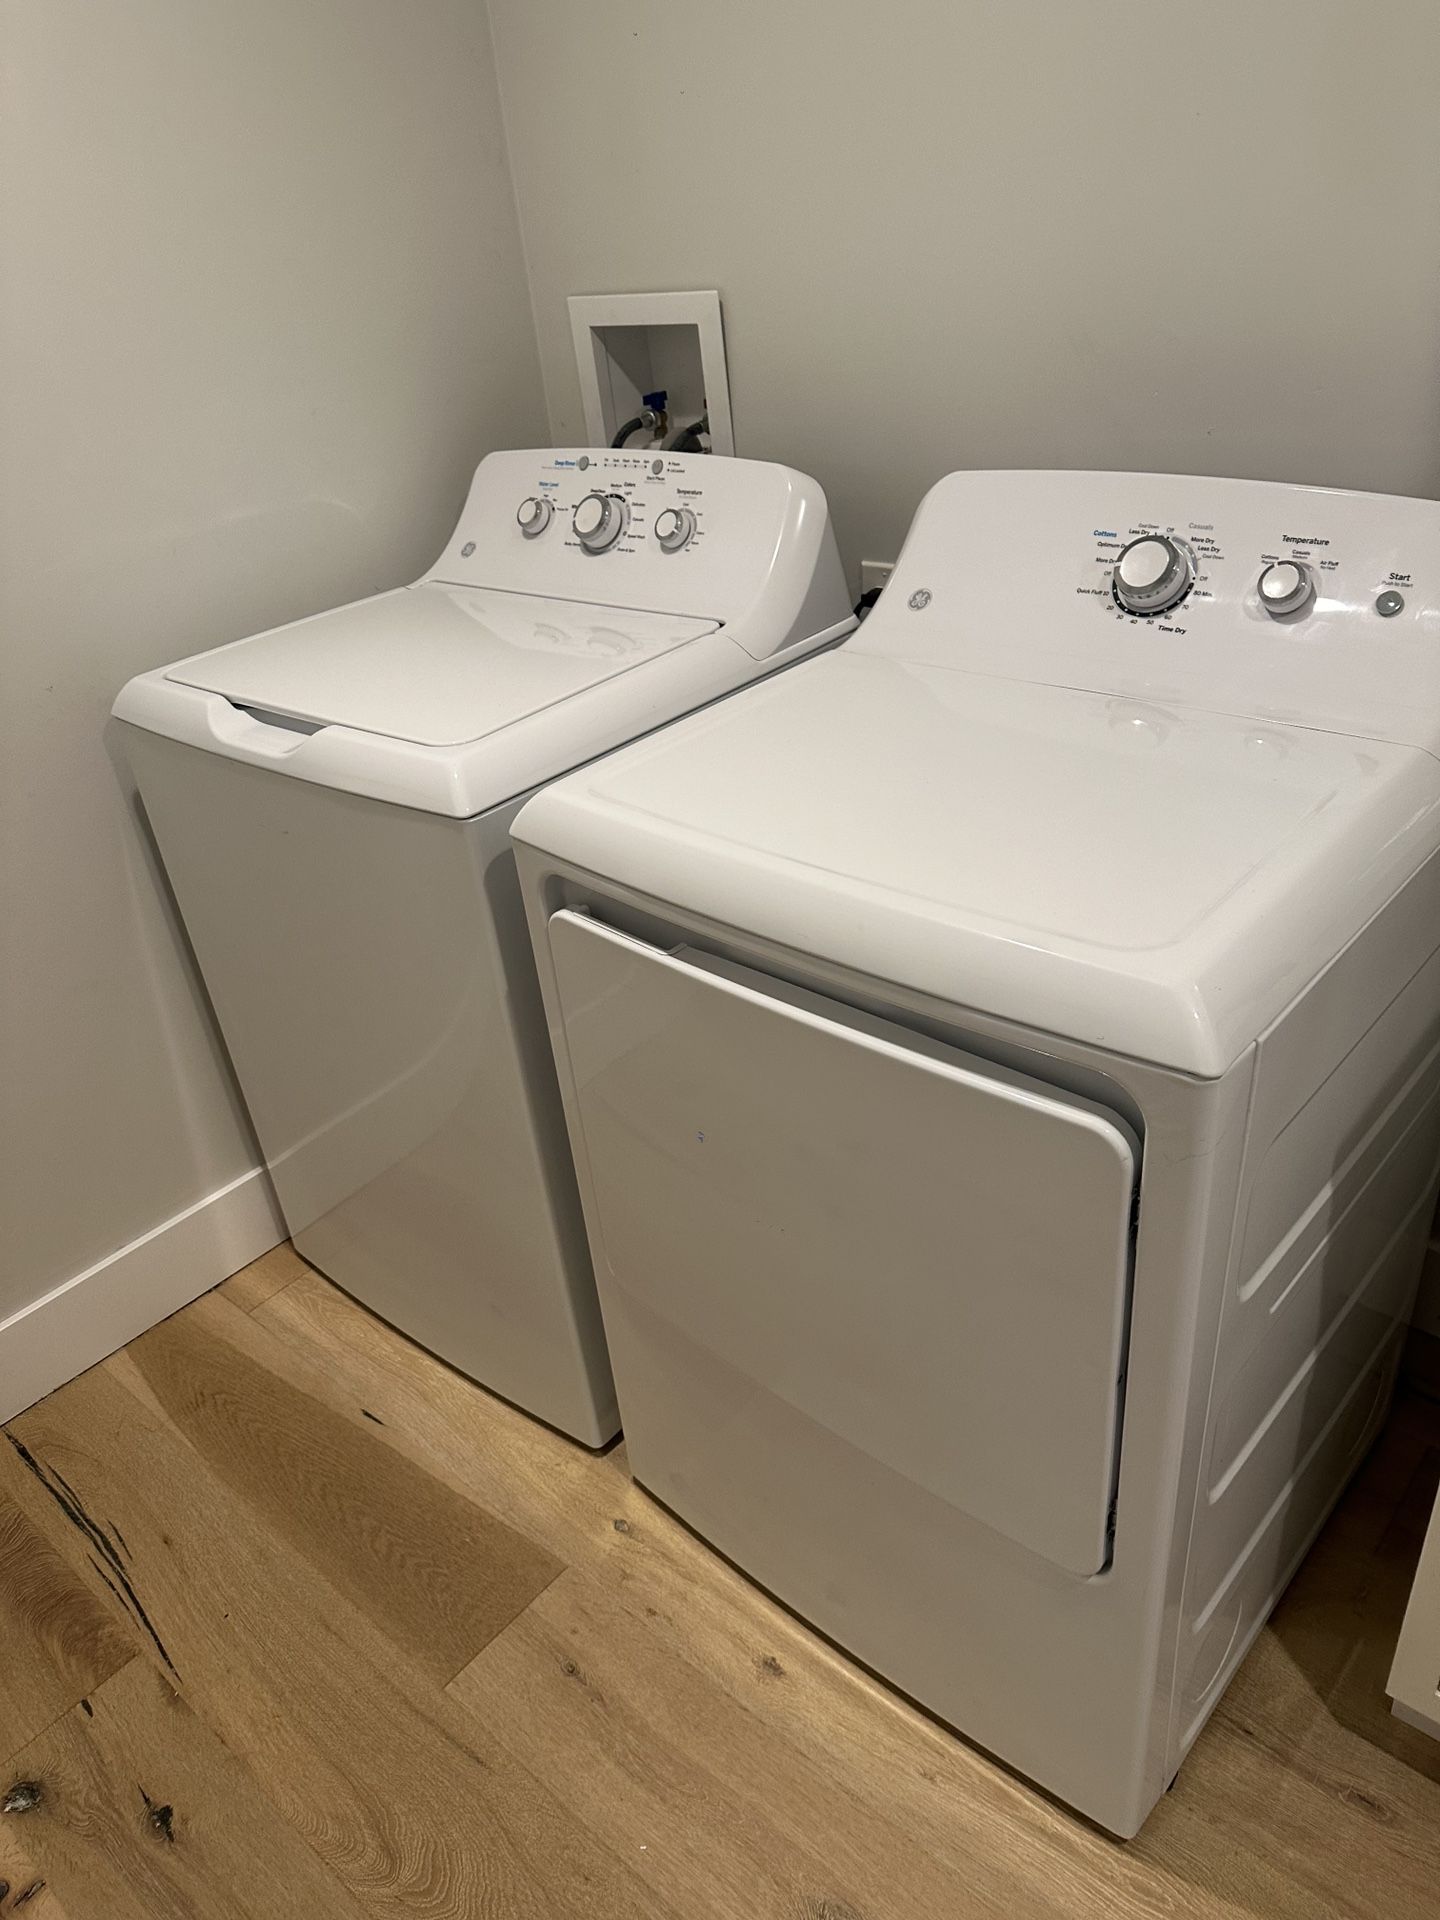 Electric Washer White - General Electric 